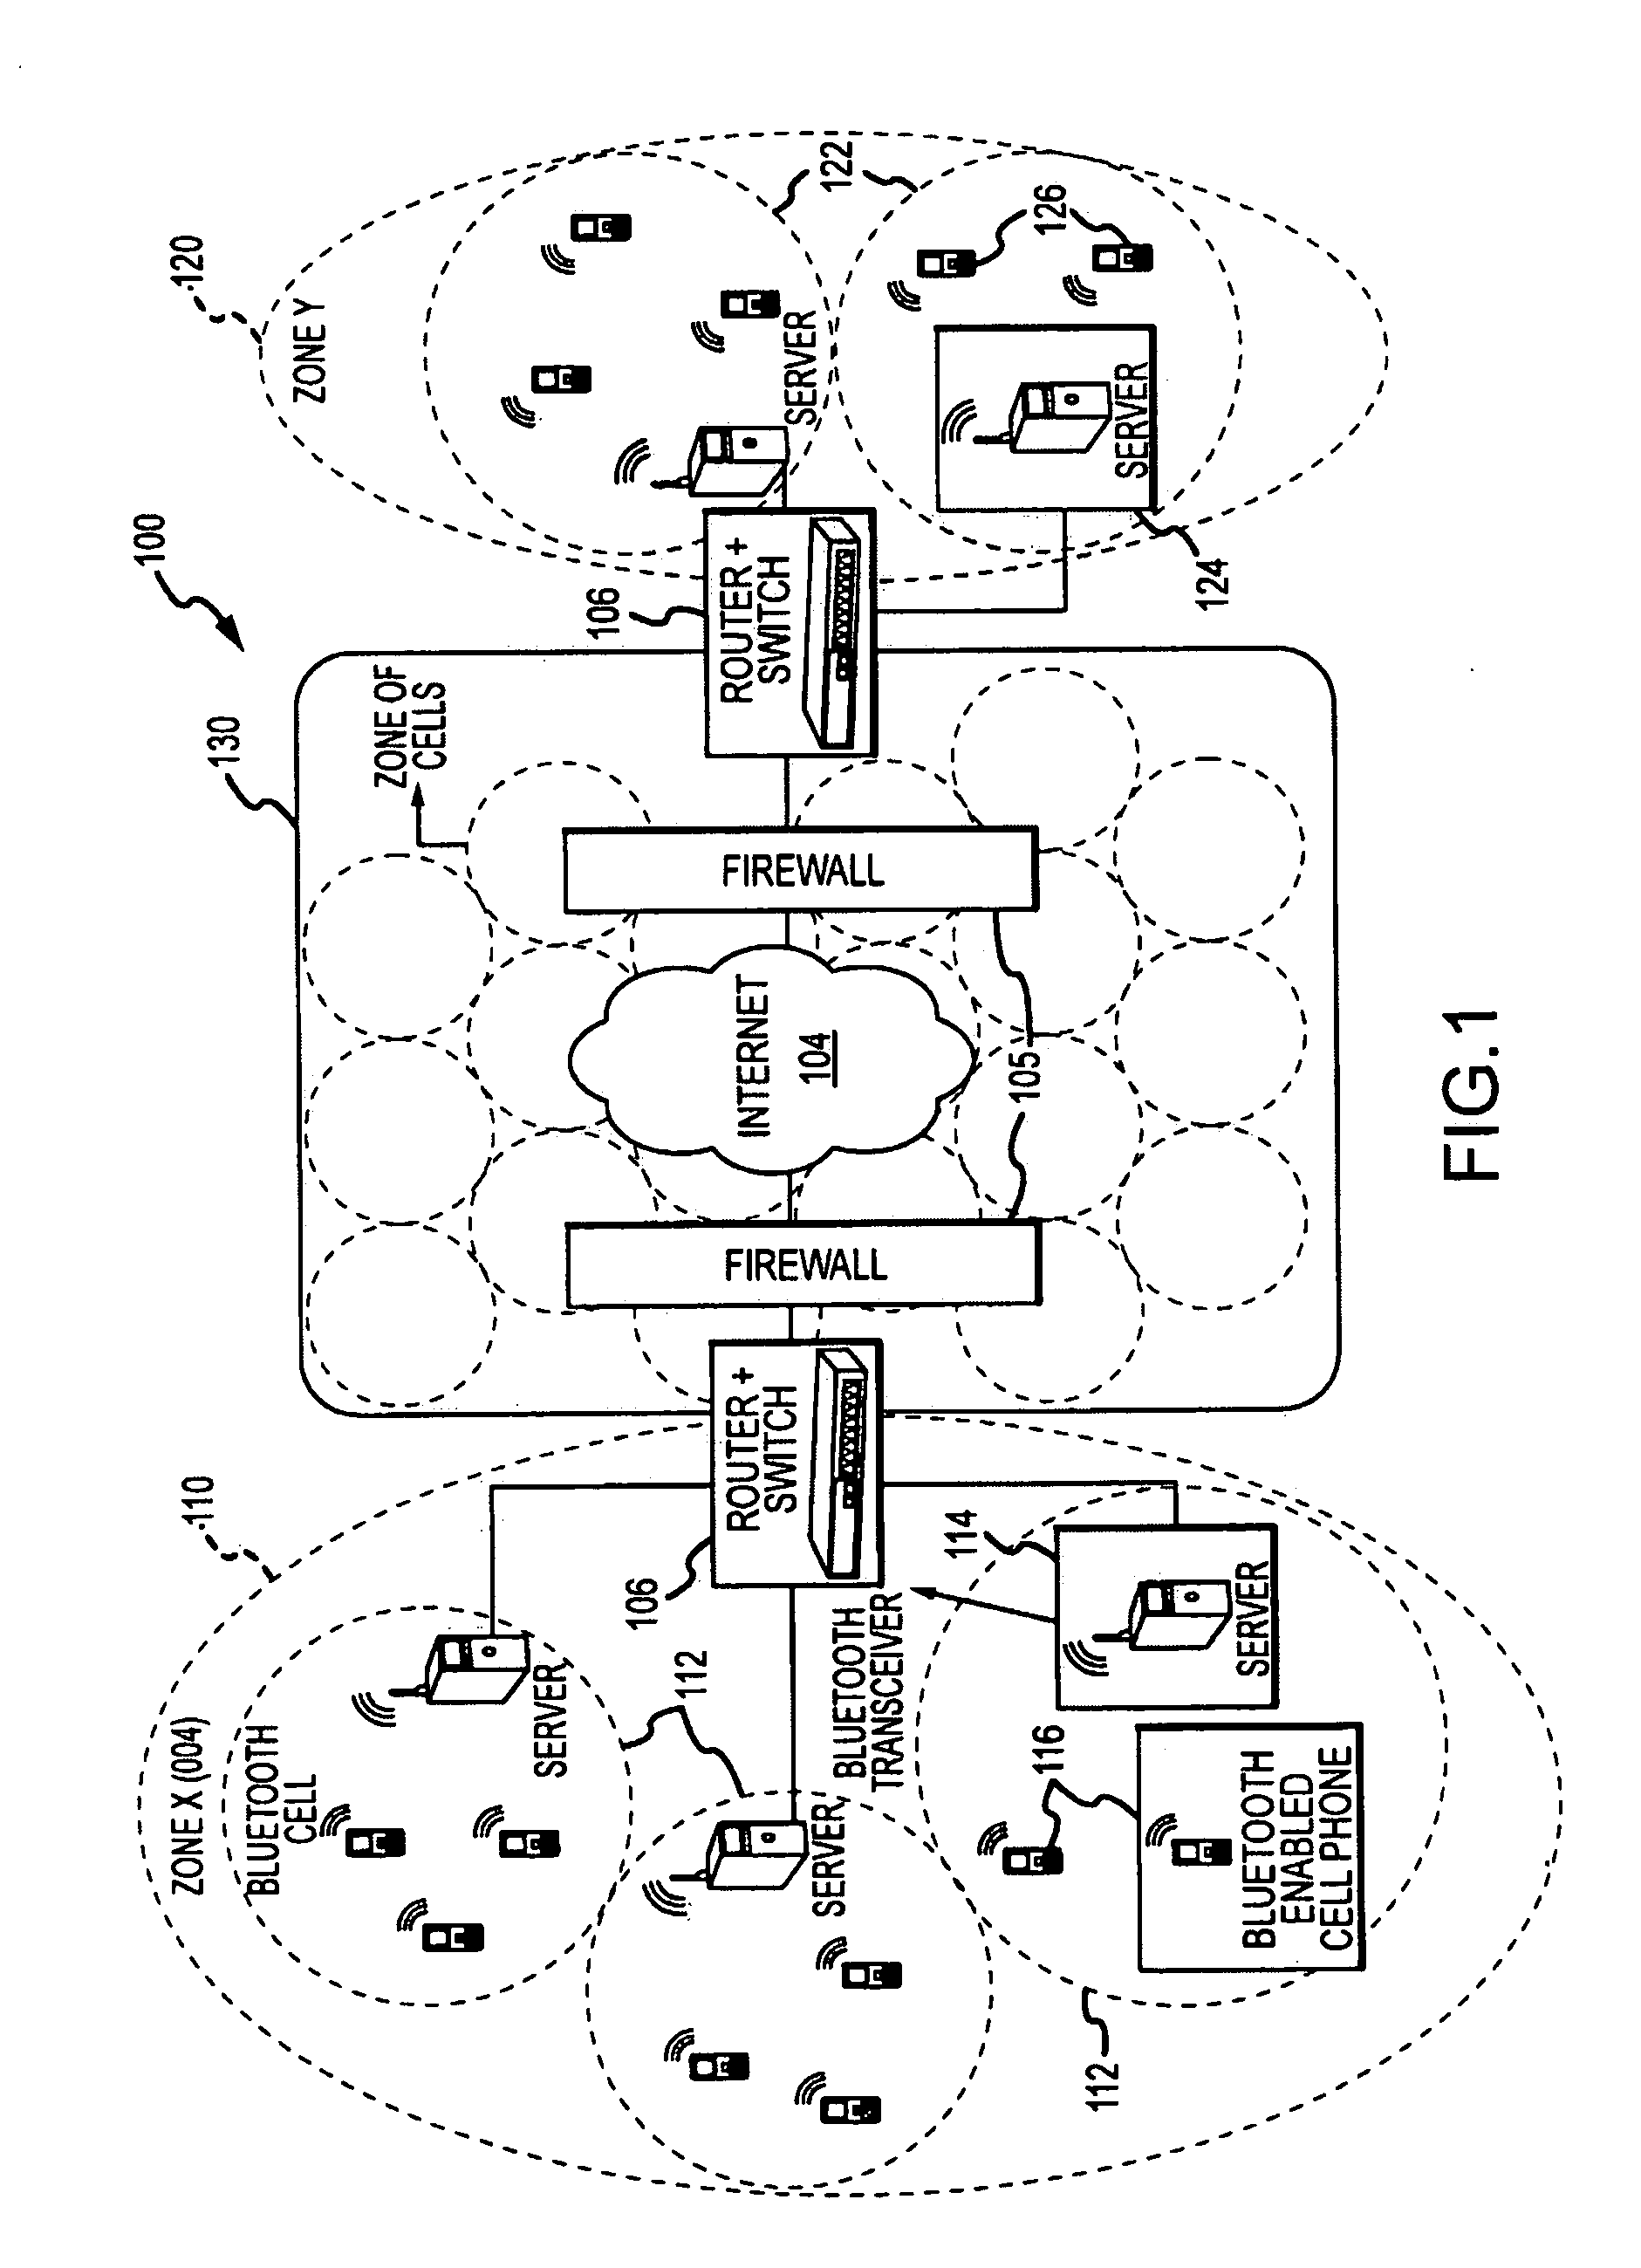 Data Communications Between Short-Range Enabled Wireless Devices Over Networks and Proximity Marketing to Such Devices